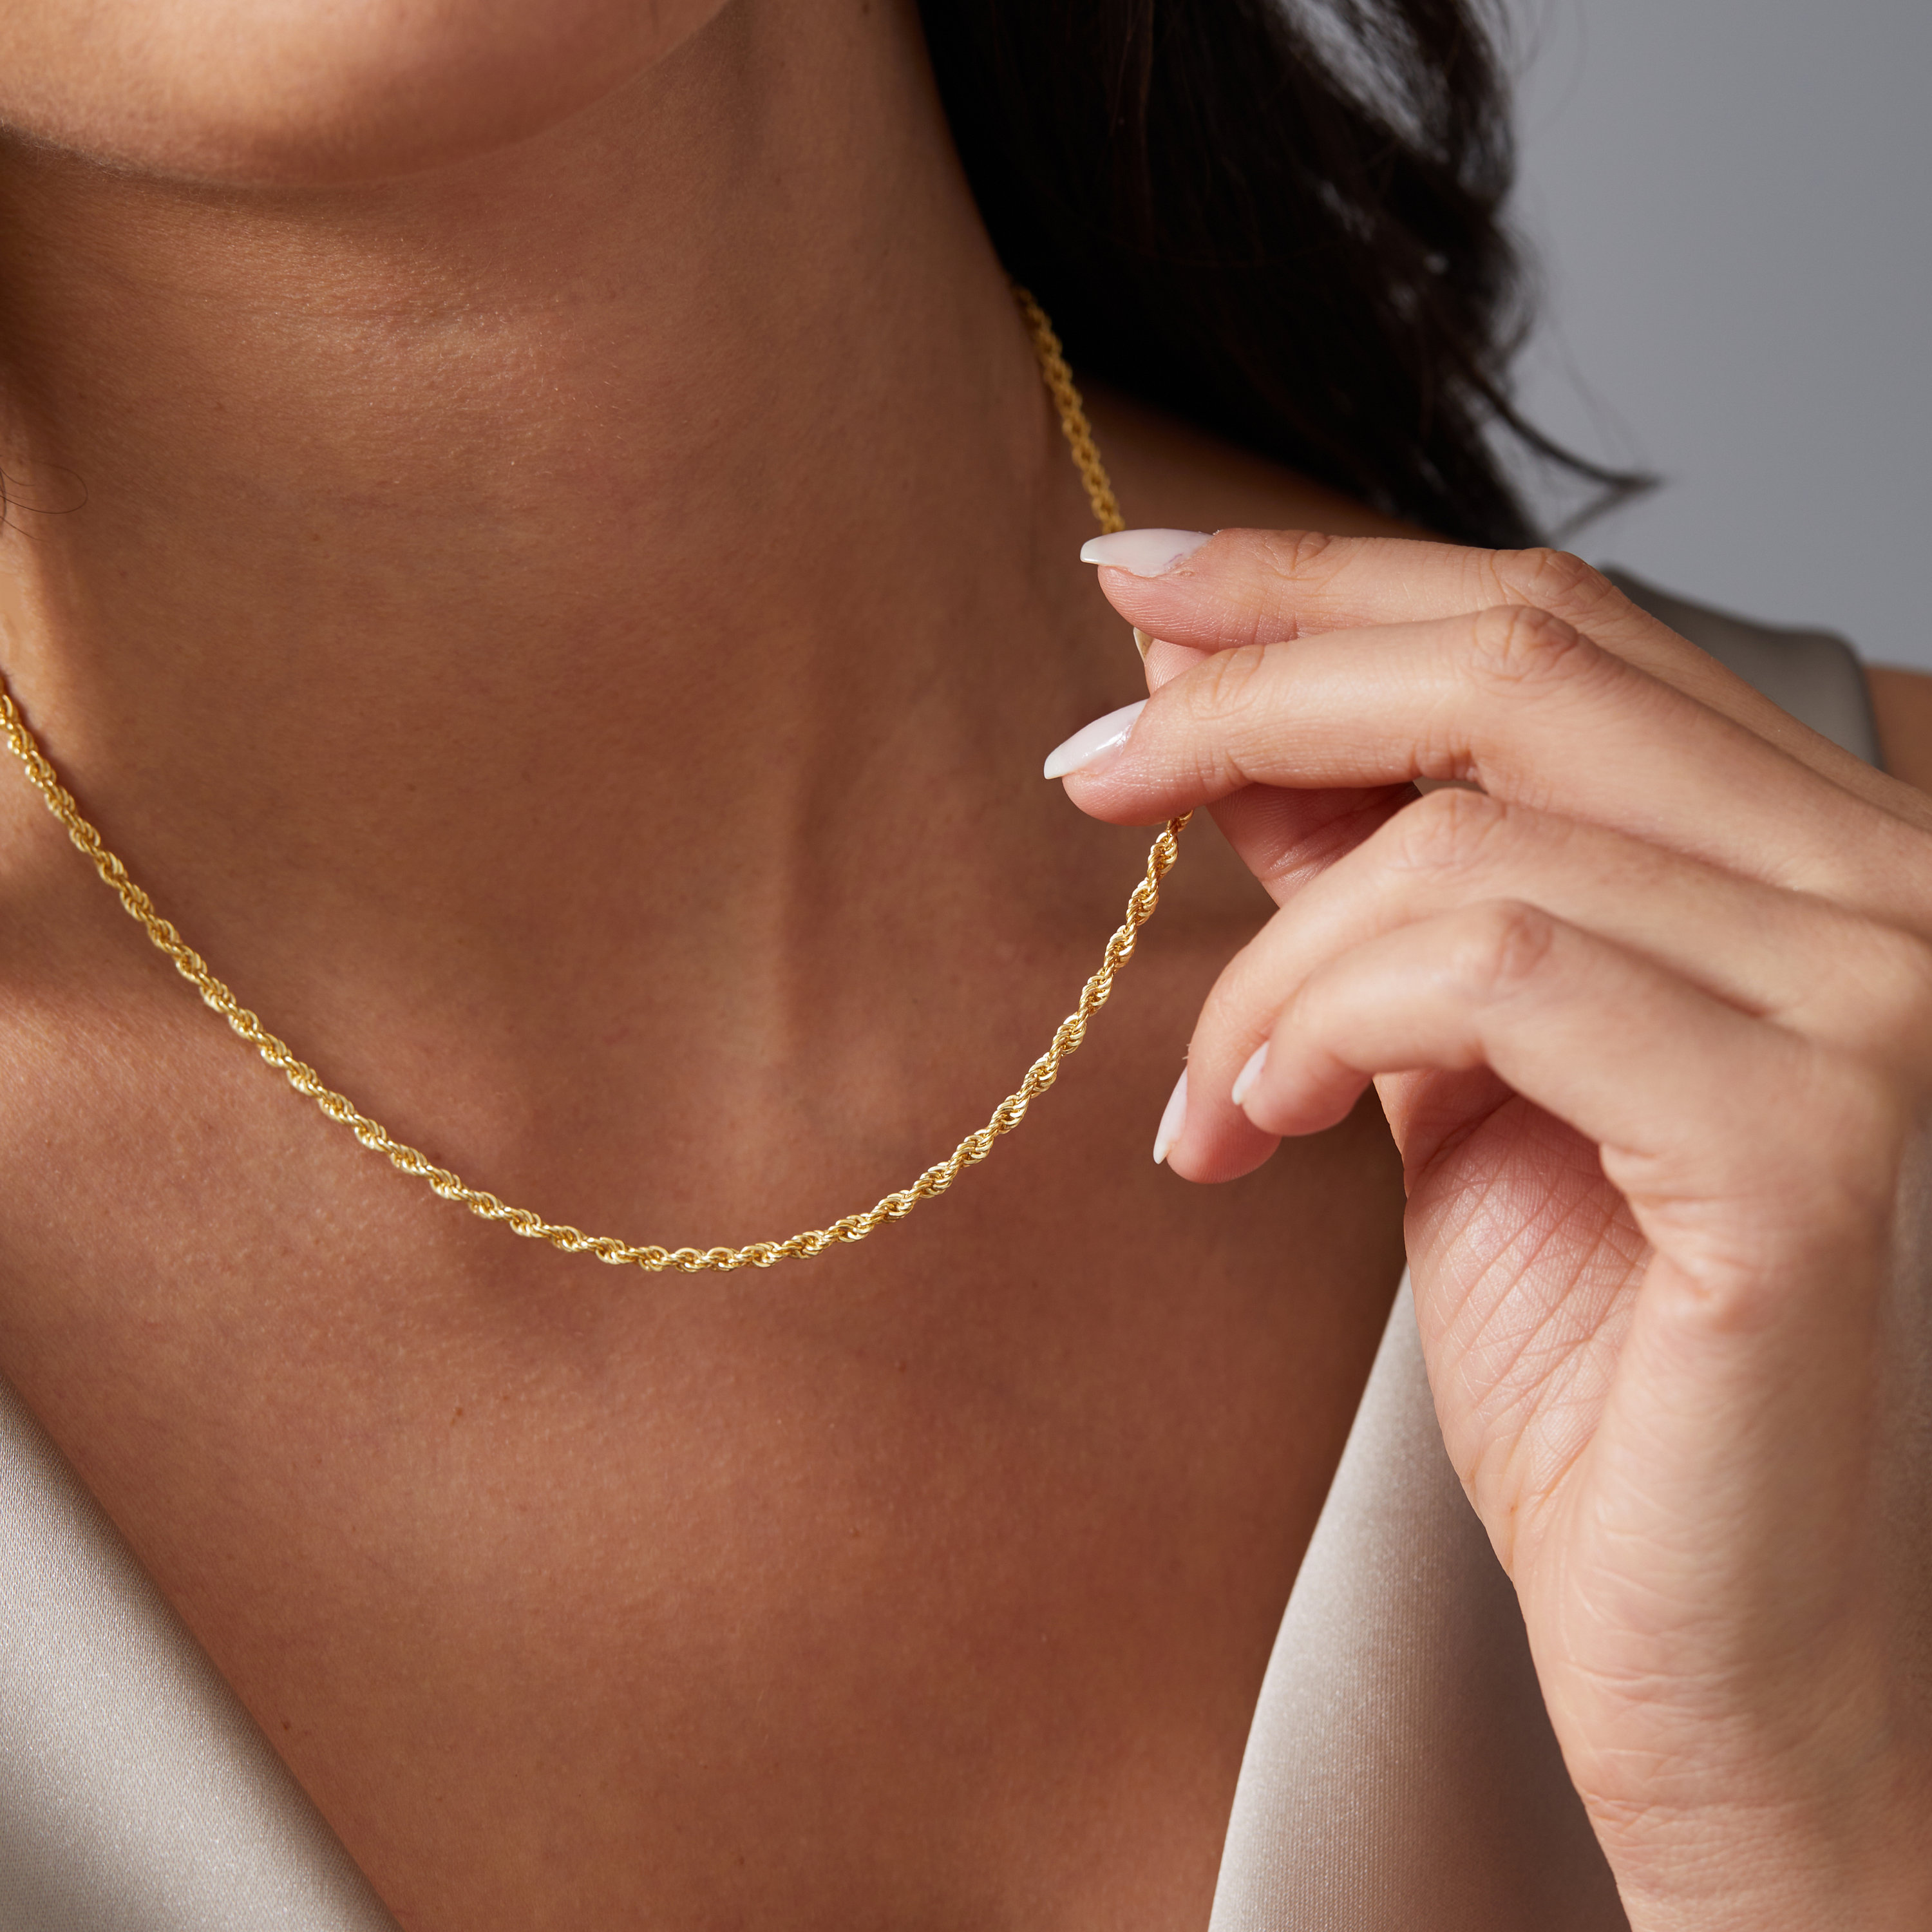 14k Gold Rope Chain Necklace, Layering Necklace, Thick Rope Chain